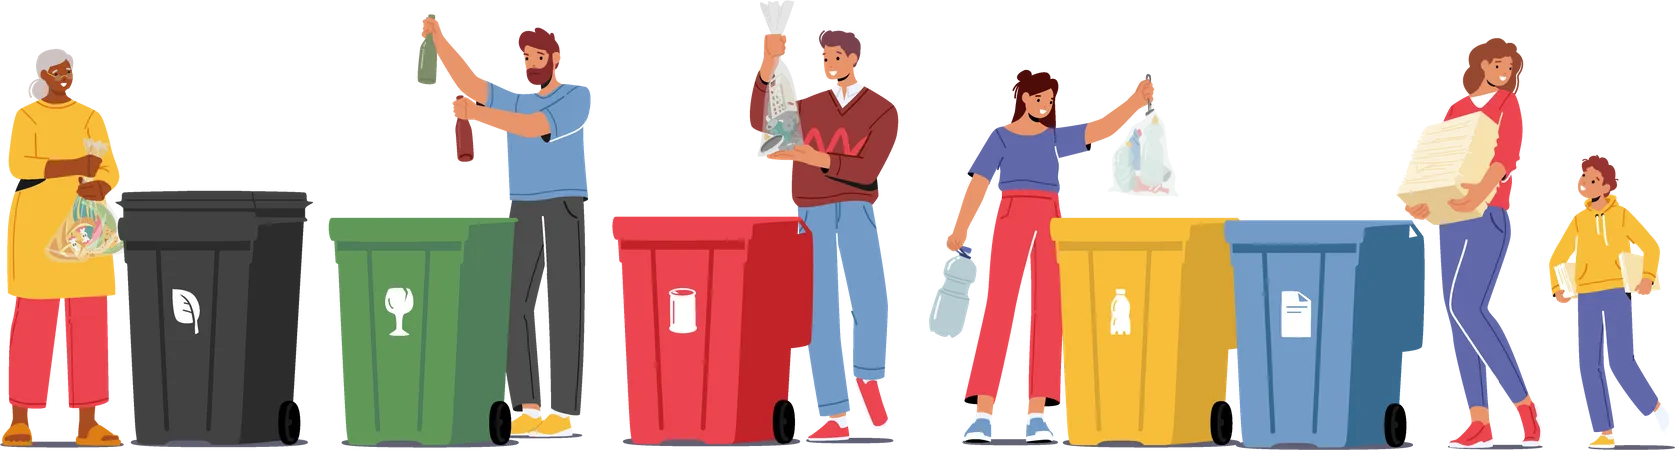 People Sorting Garbage Into Different Containers For Separation Illustration